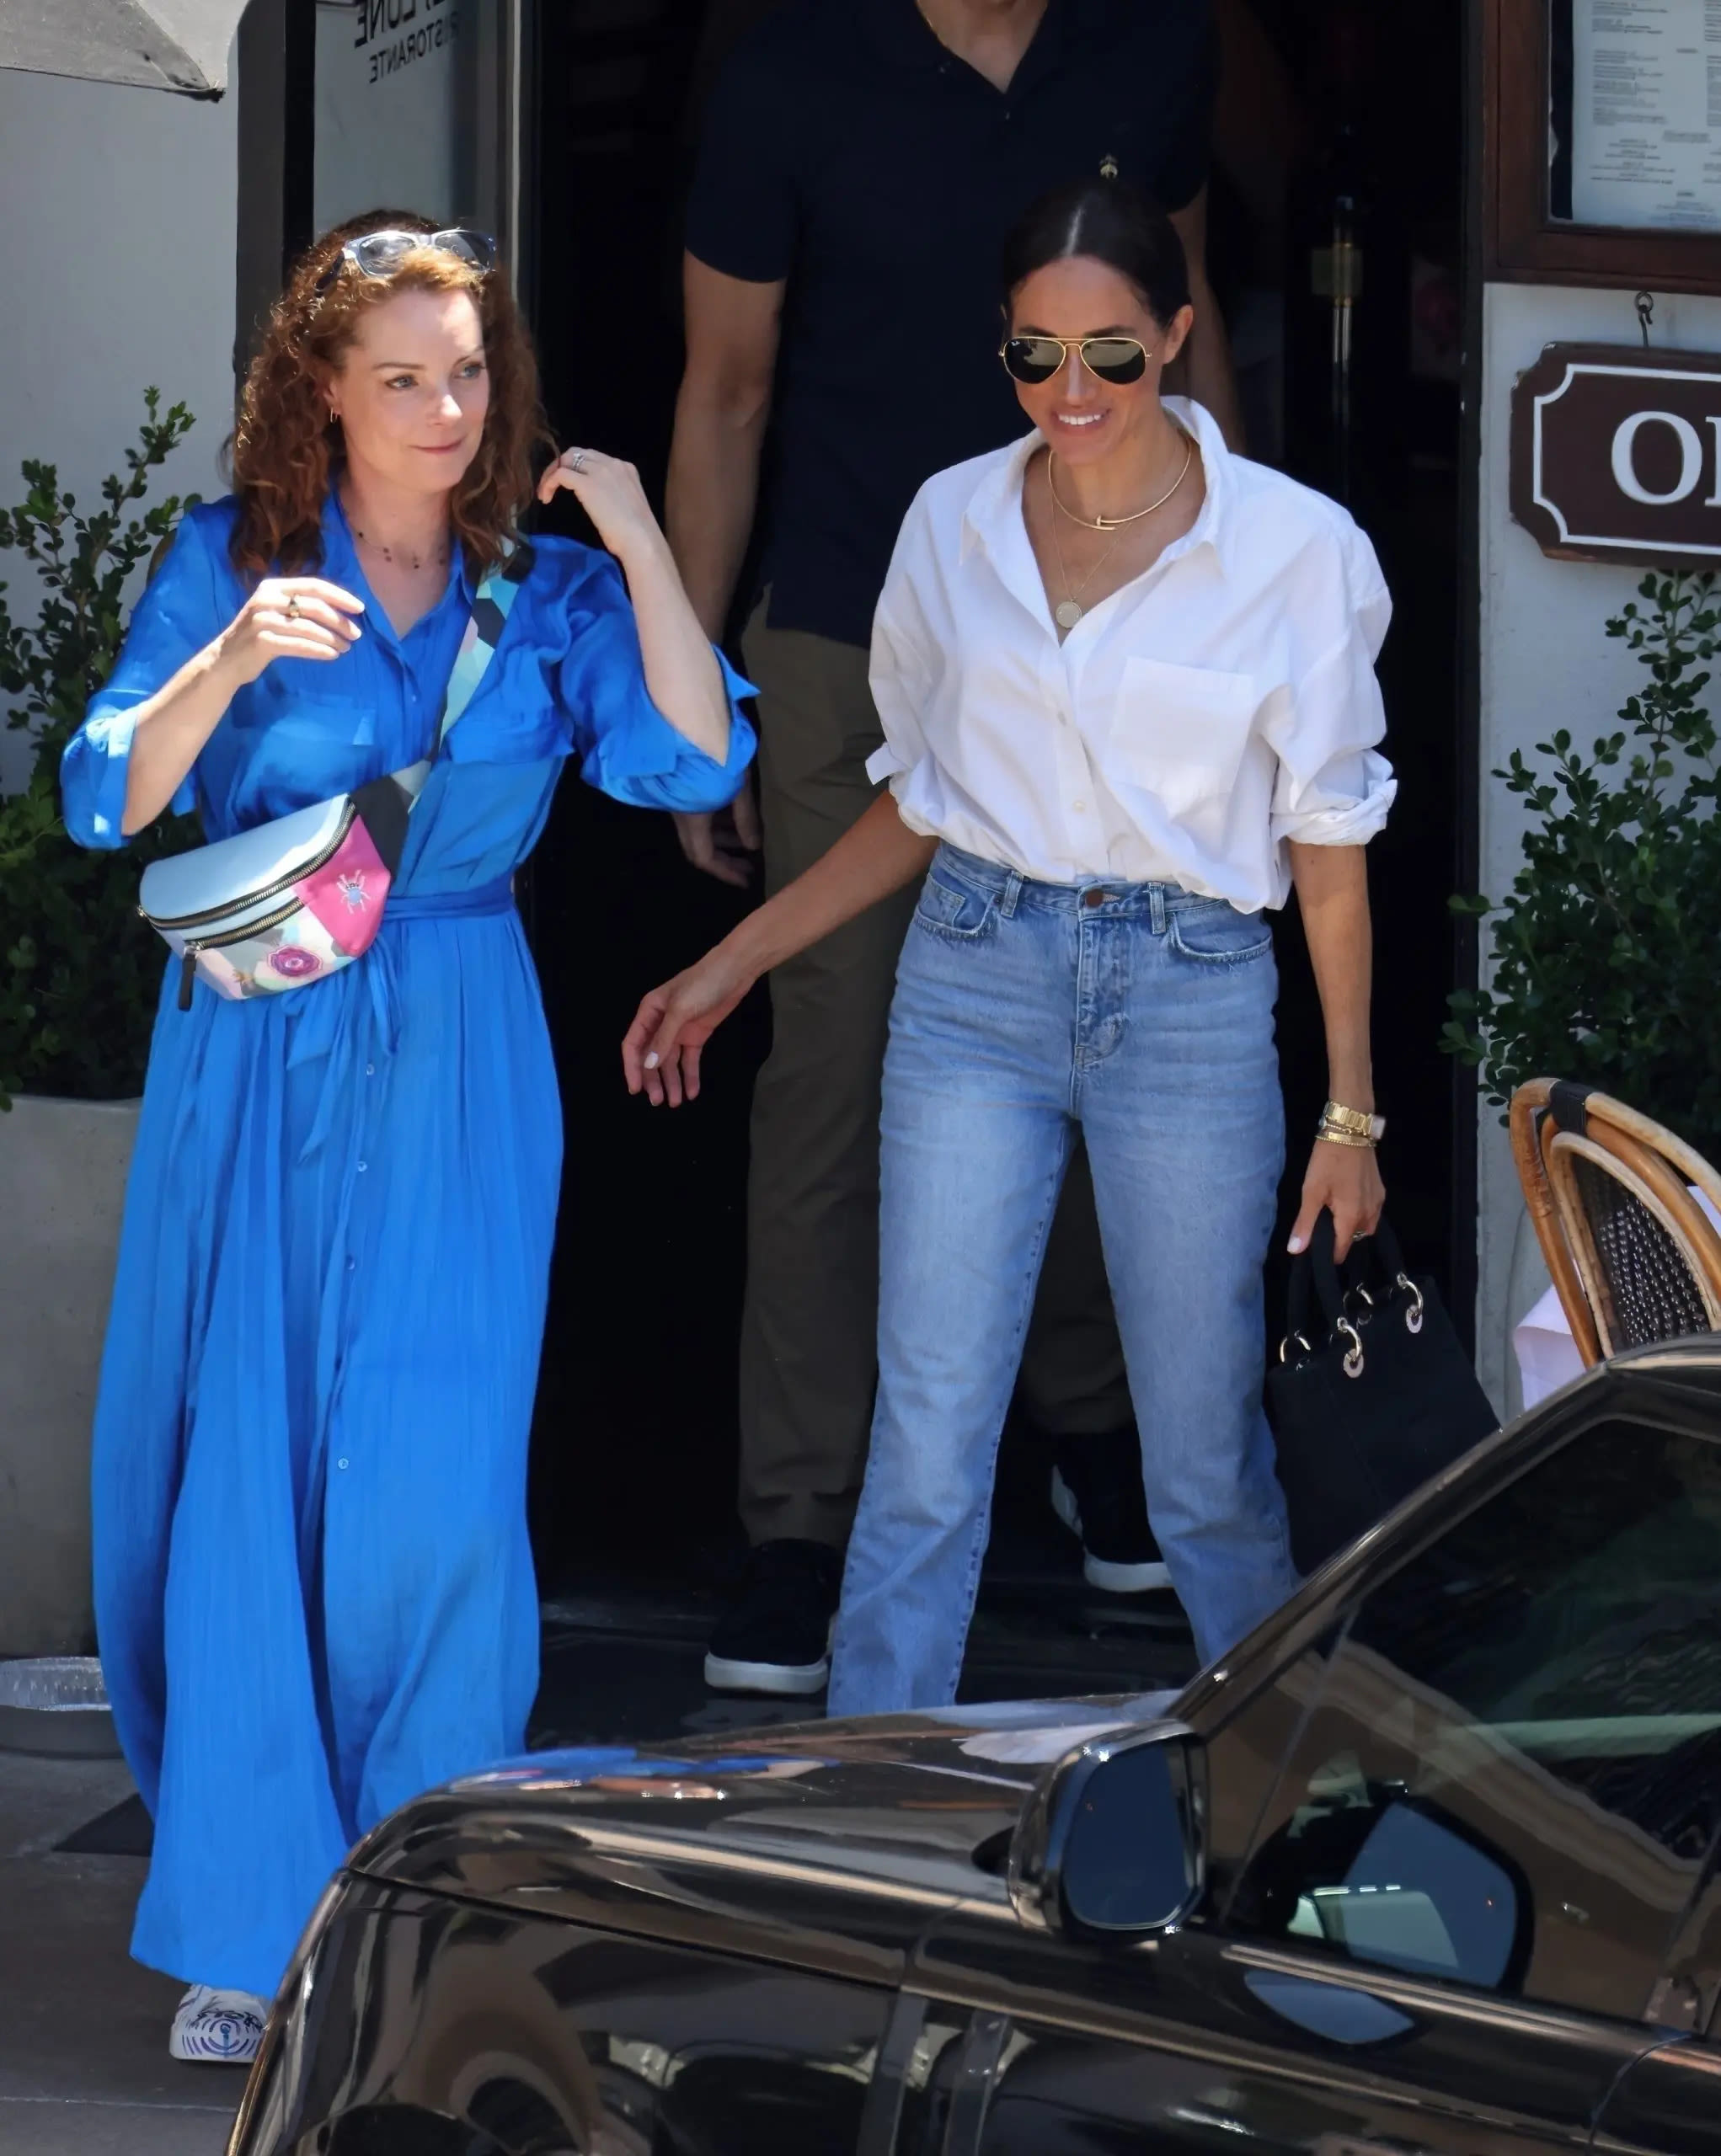 Meghan Markle steps up Hollywood networking with Kimberly Williams-Paisley lunch, reported Hamptons trip